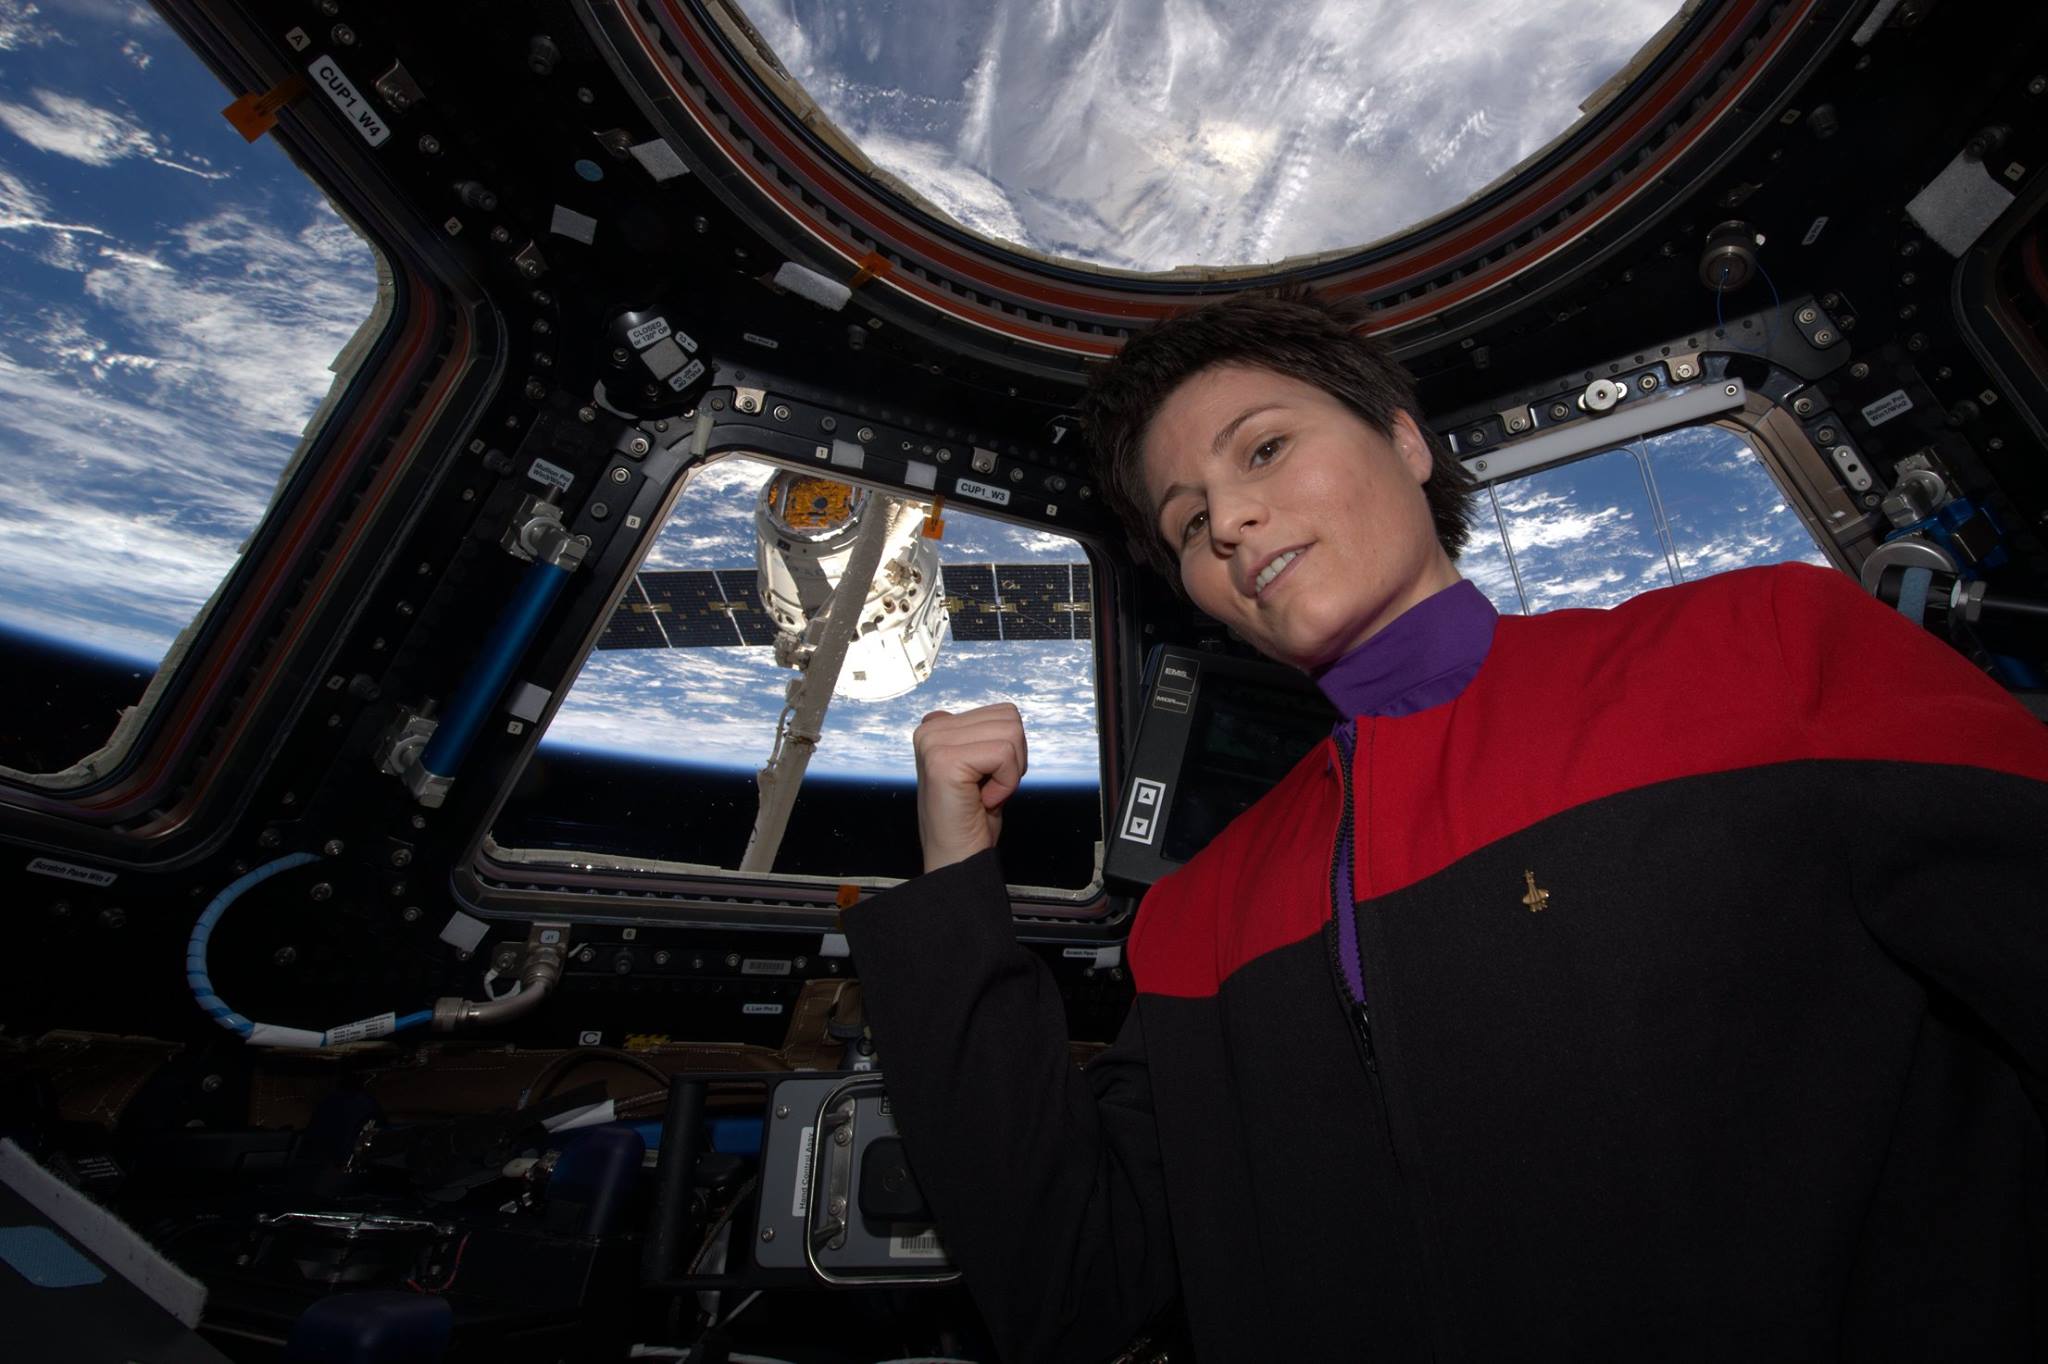 Italian astronaut Samantha Cristoforetti, of the European Space Agency (ESA), poses with the SpaceX CRS-6 Dragon in her Starfleet outfit after successfully capturing the cargo and supply-filled spacecraft. Photo Credit: NASA/ESA